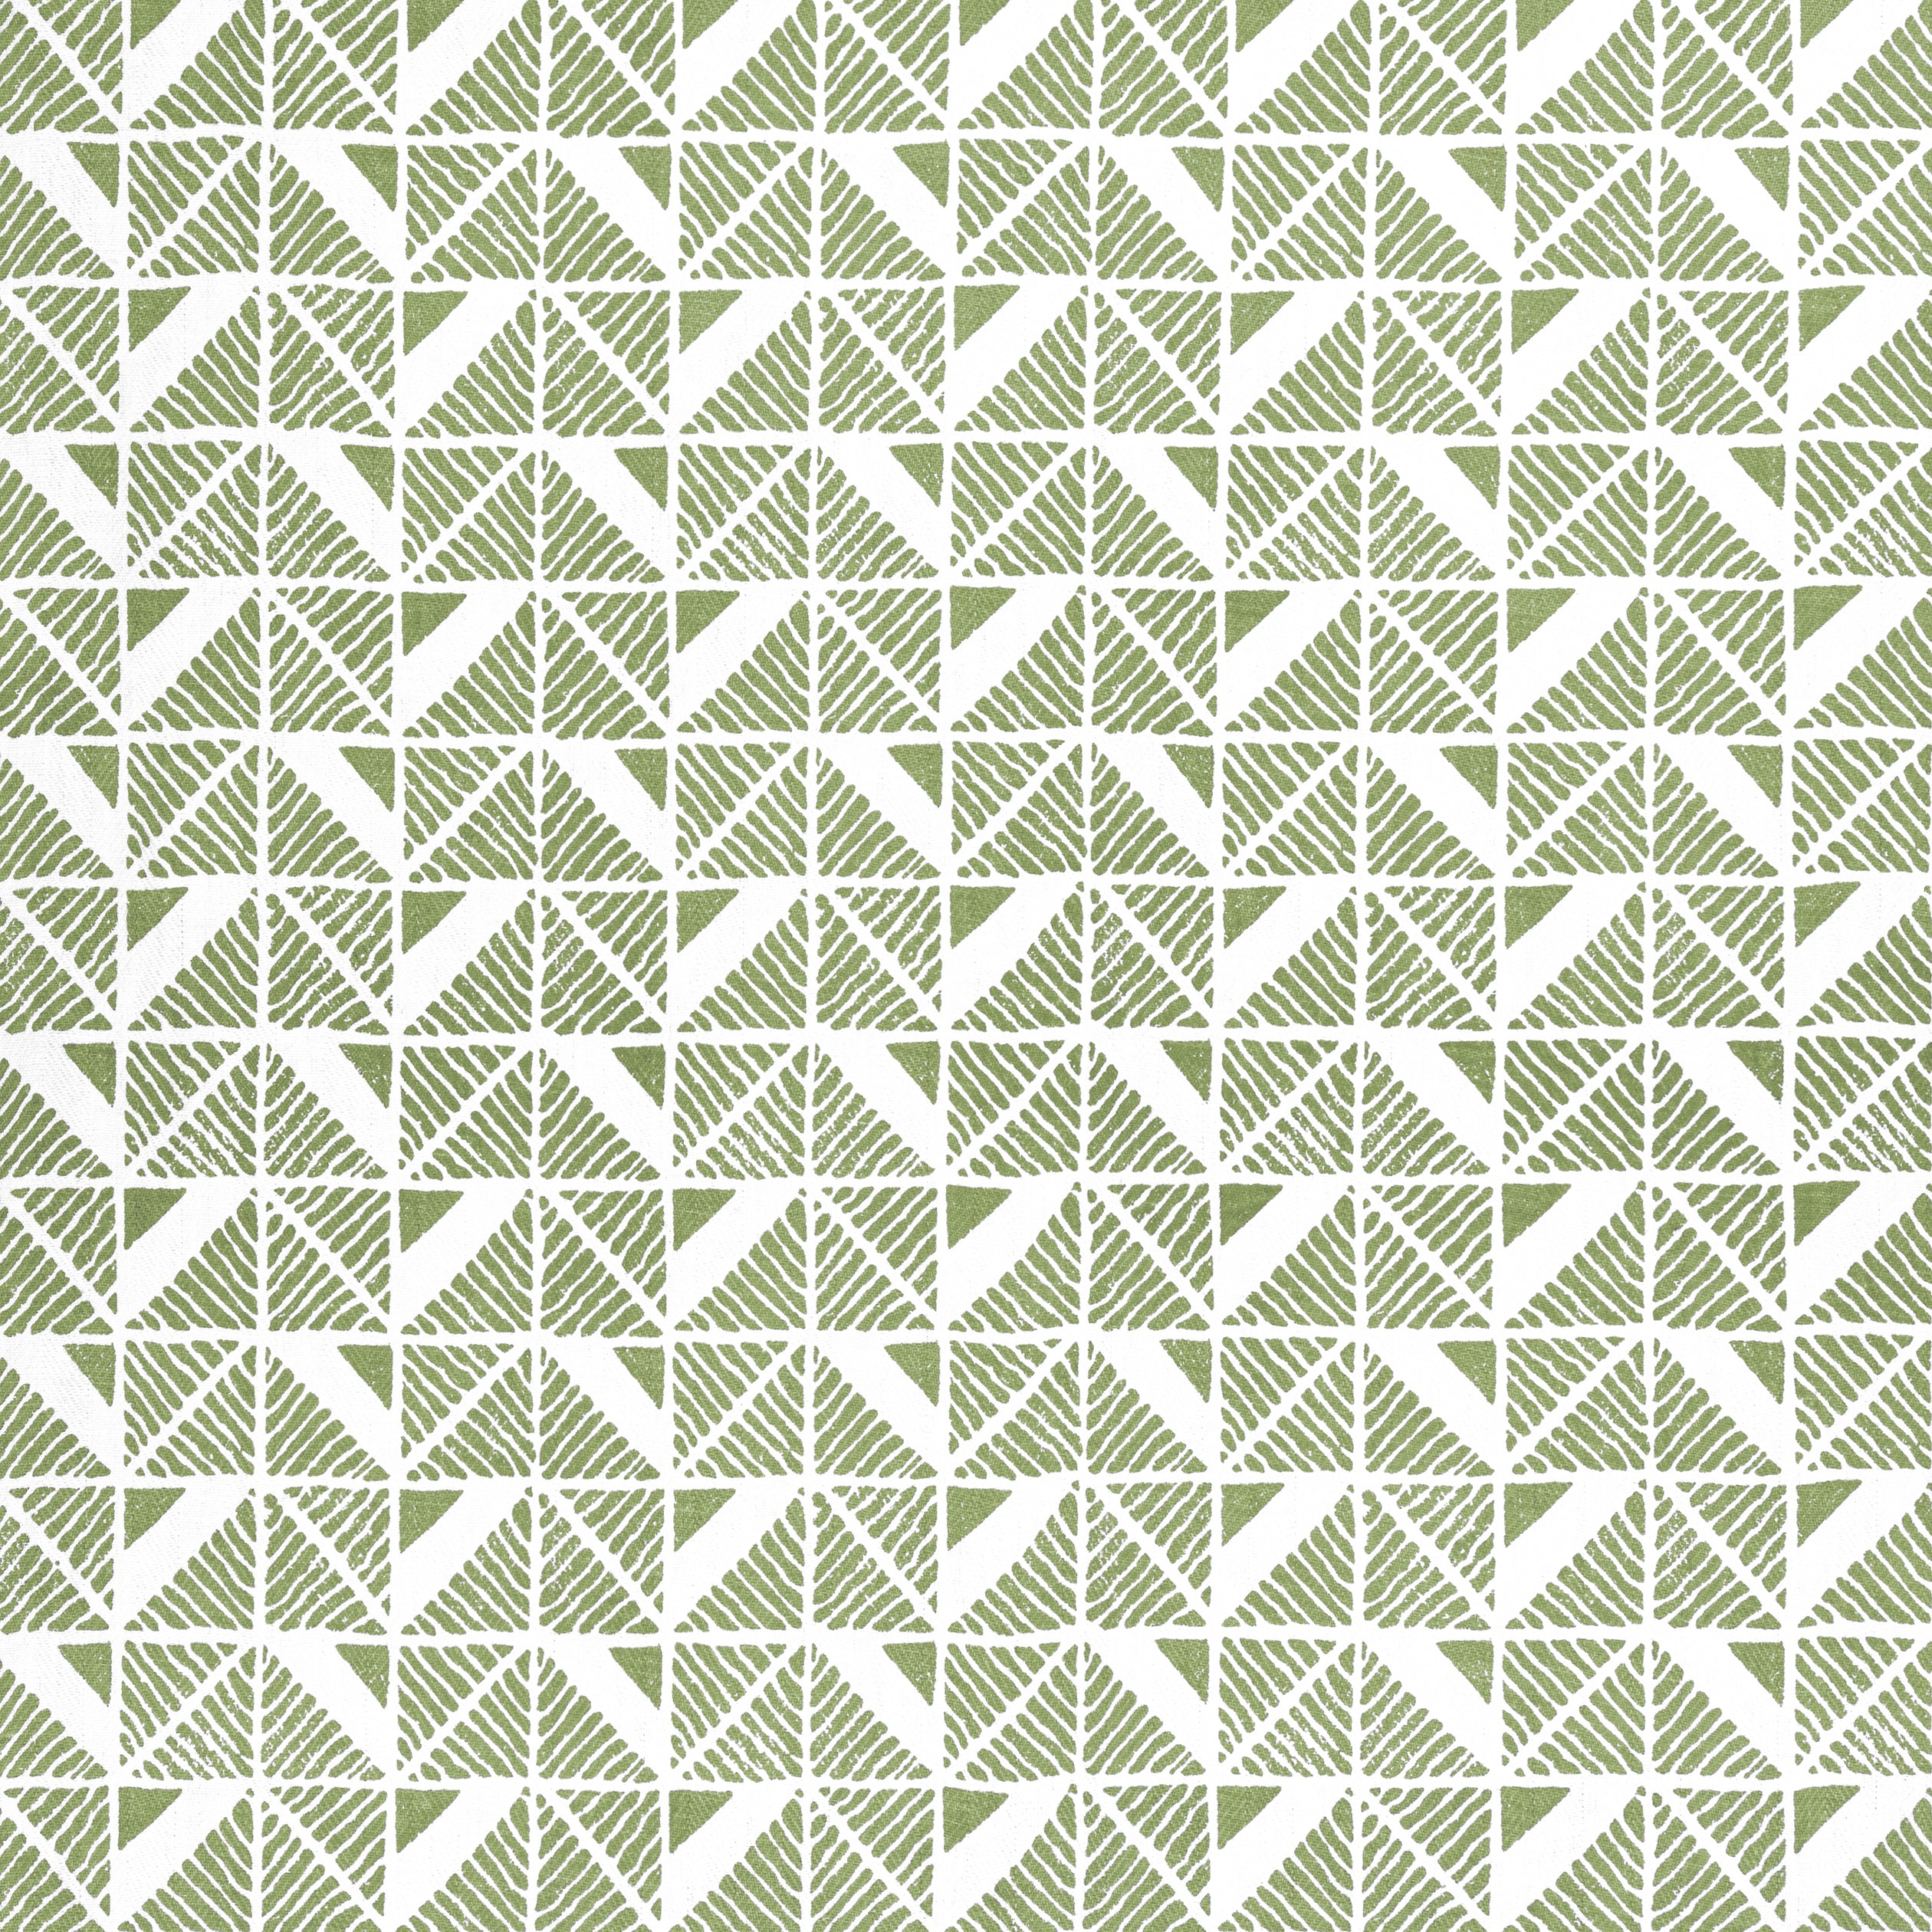 Bloomsbury Square fabric in green color - pattern number AF23117 - by Anna French in the Willow Tree collection